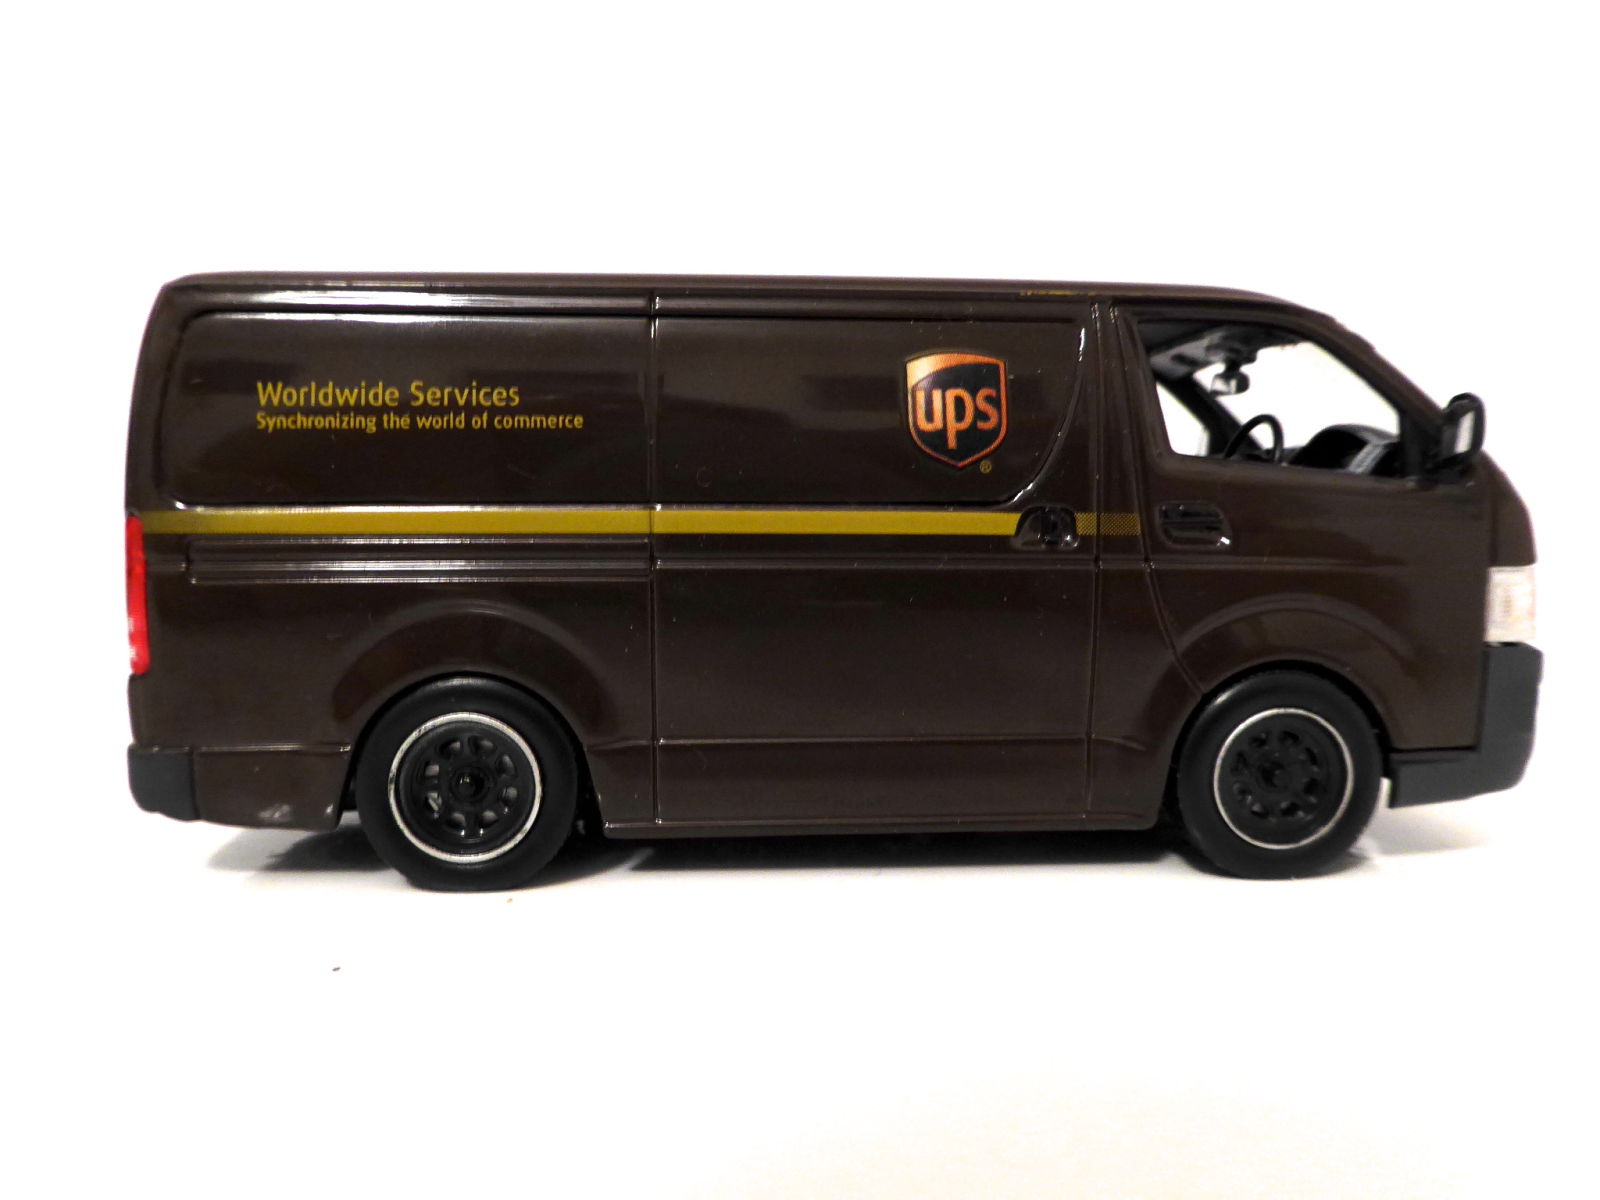 Illustration for article titled Forty 3rd: When UPS delivers a UPS